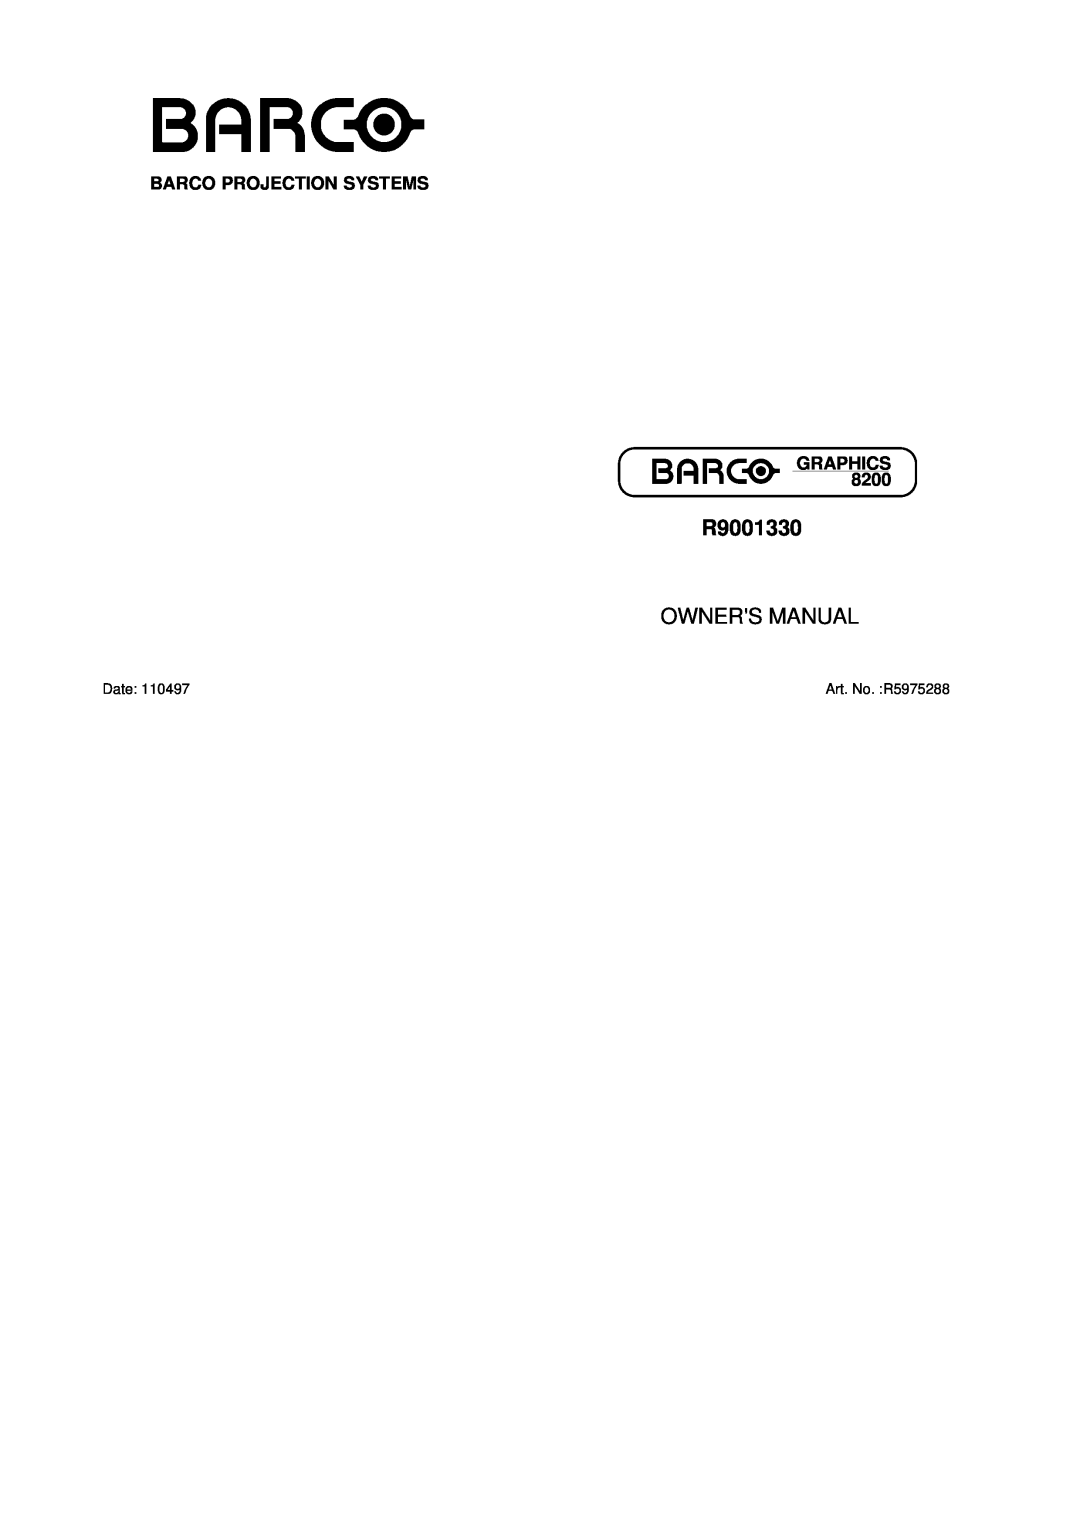 Barco R9001330 owner manual Barco Projection Systems Graphics, Owners Manual 